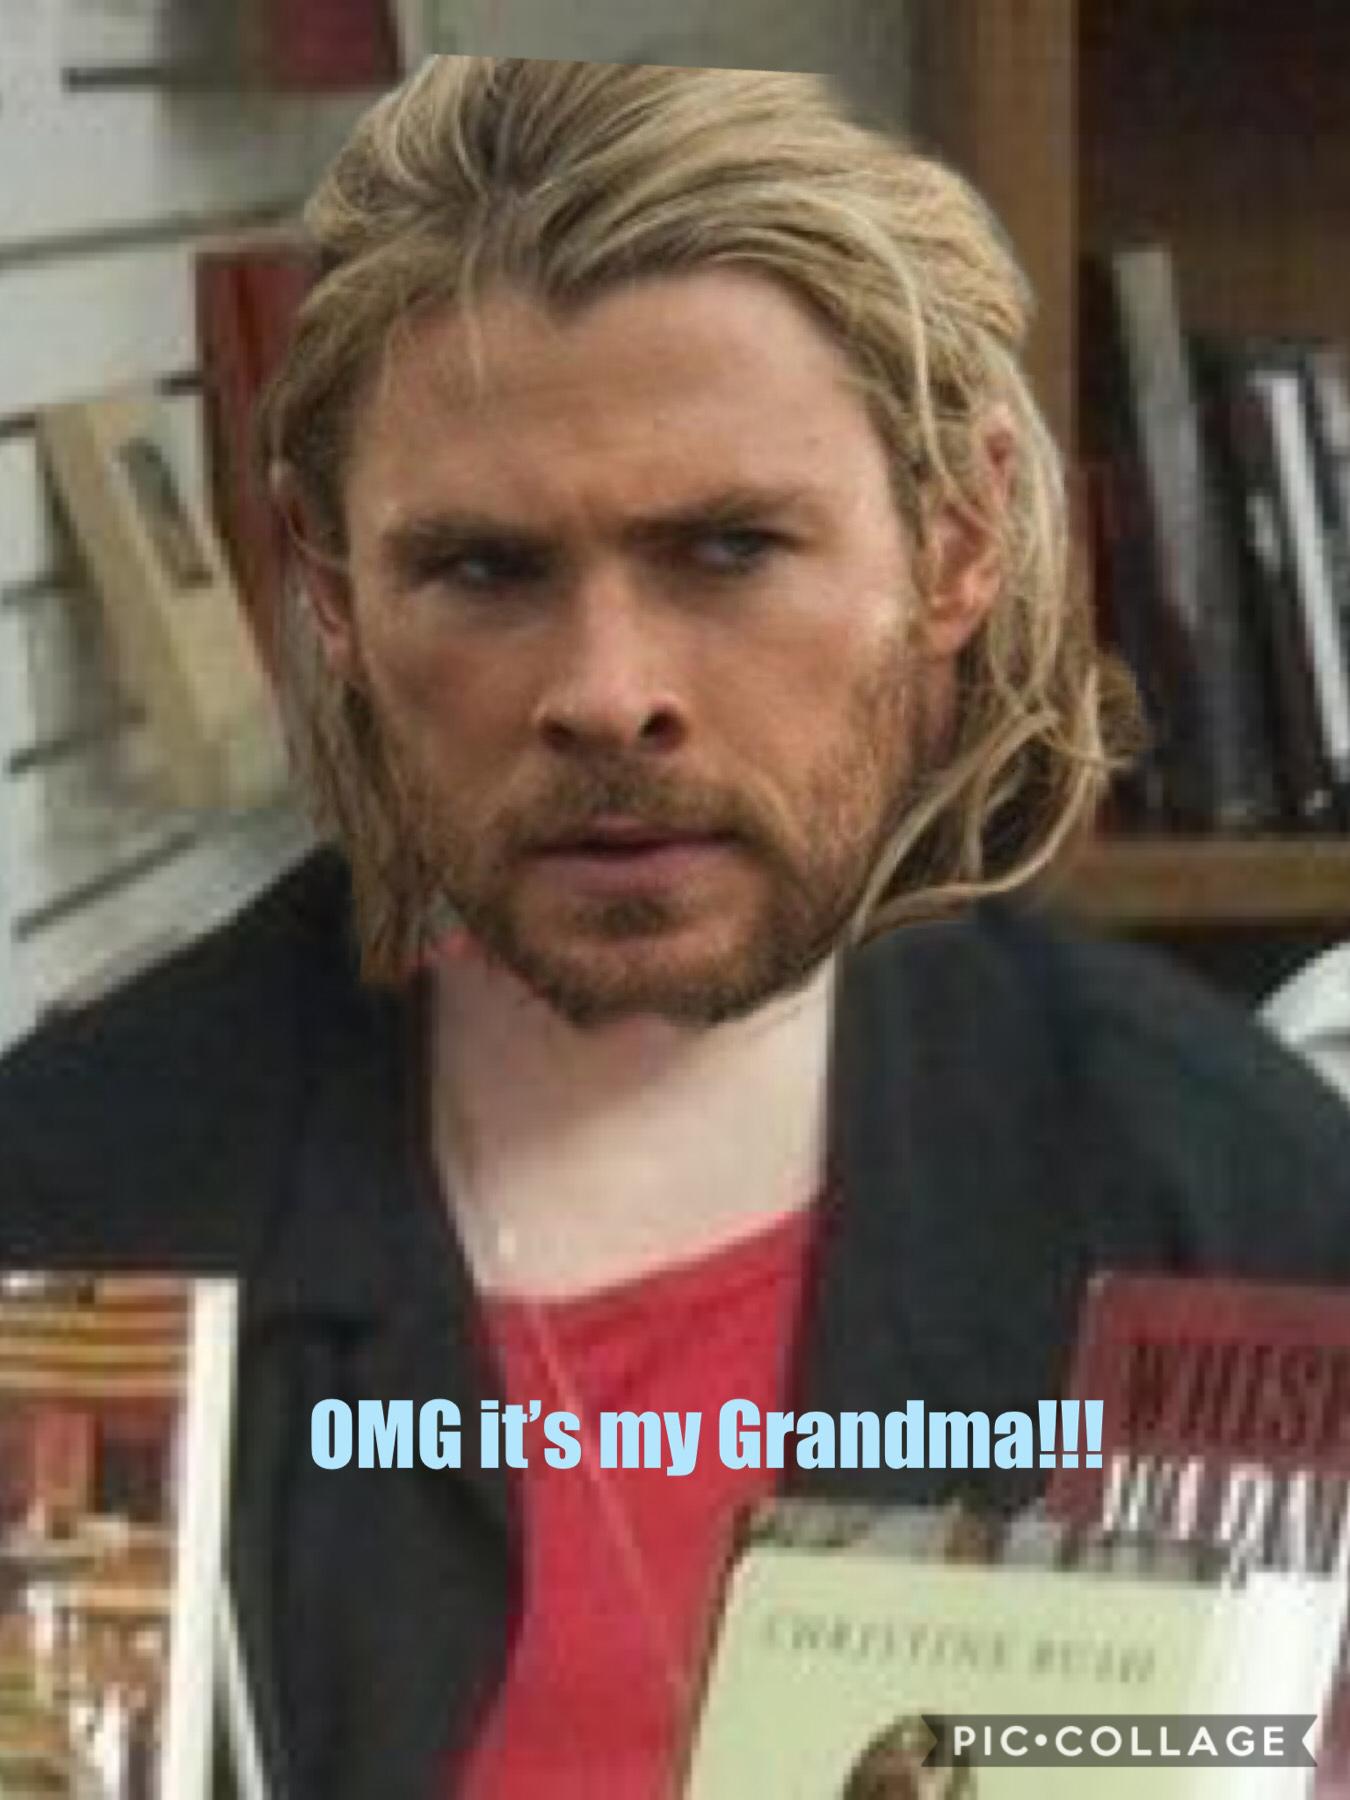 The person that I put Thor’s head on is actually my grandma!!!